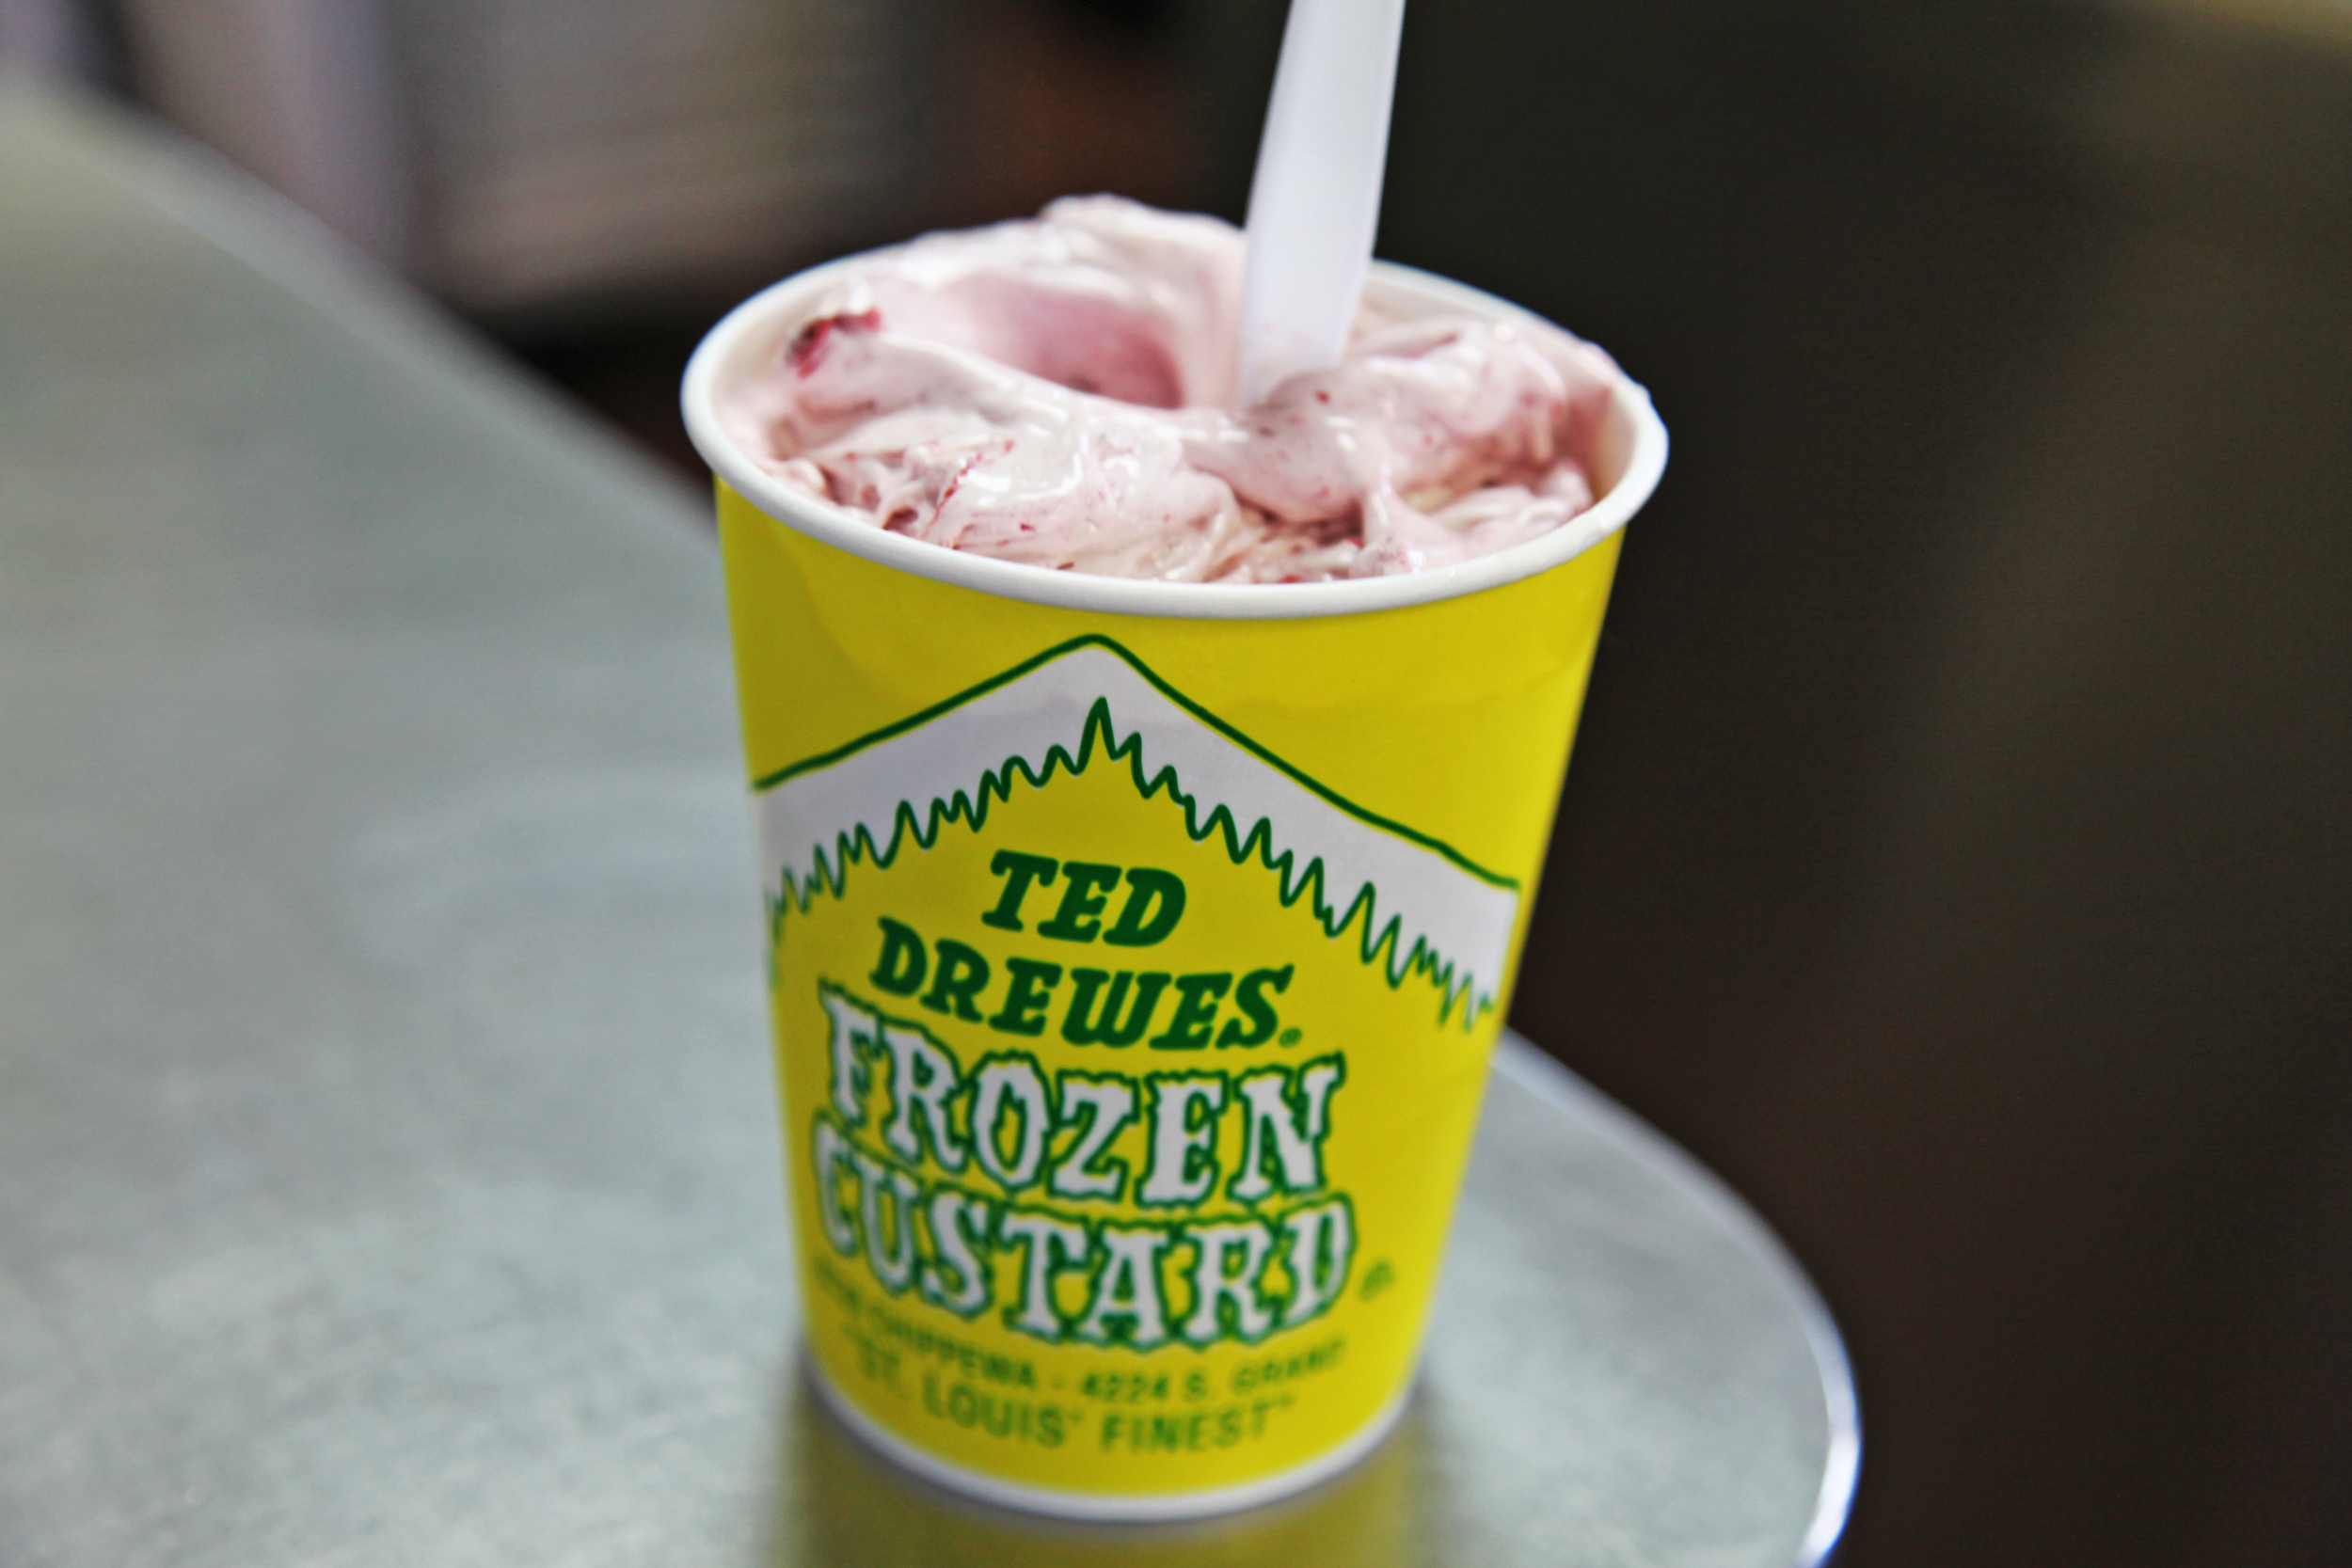 Ted Drewes Gift Shop